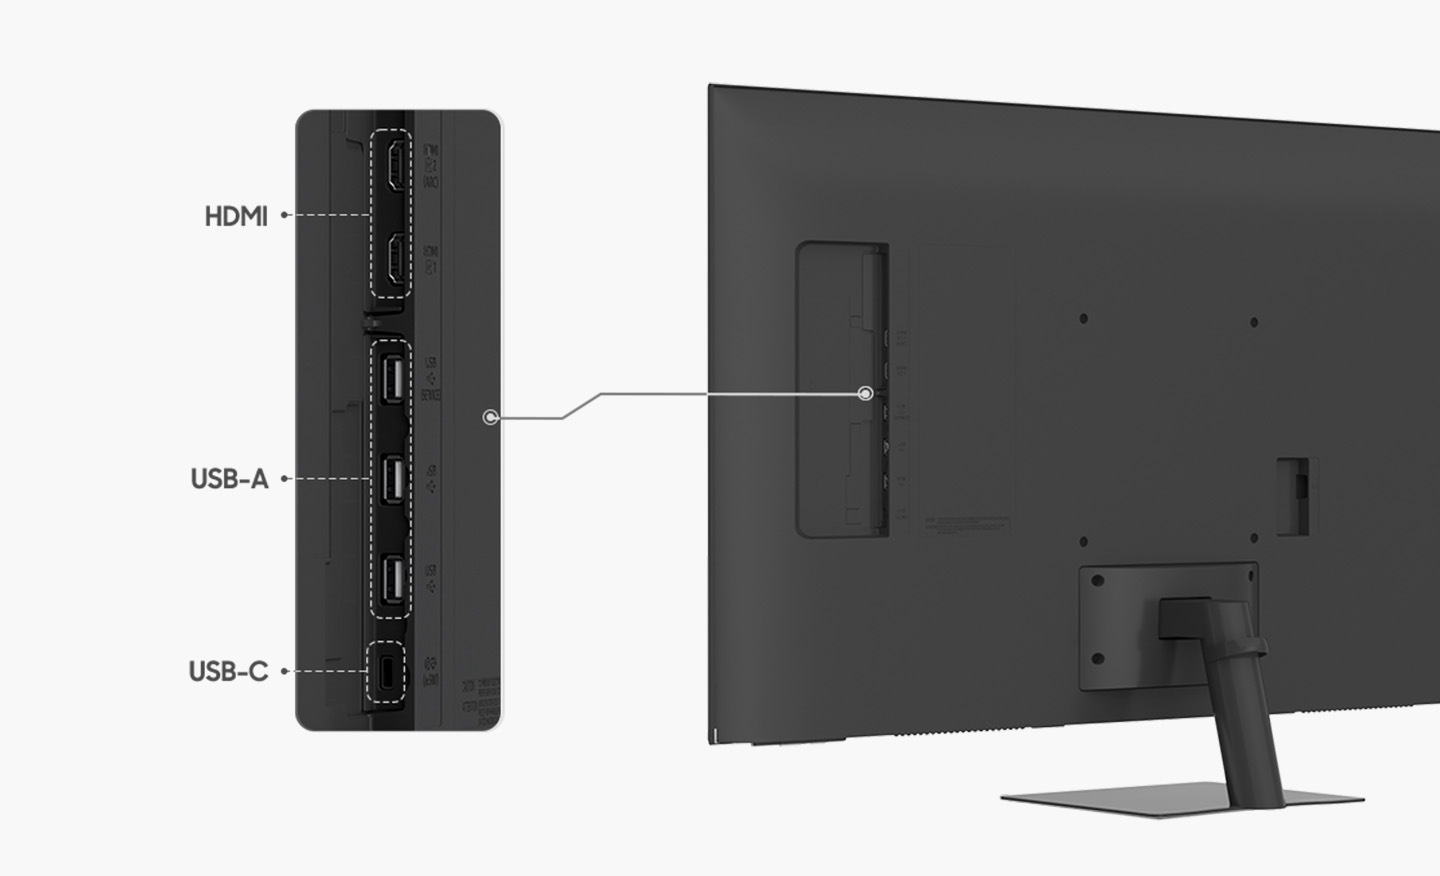 There is a monitor on the right, and next to it, the ports are enlarged. The monitor ports are USB-C, two HDMI, and three USB-A.